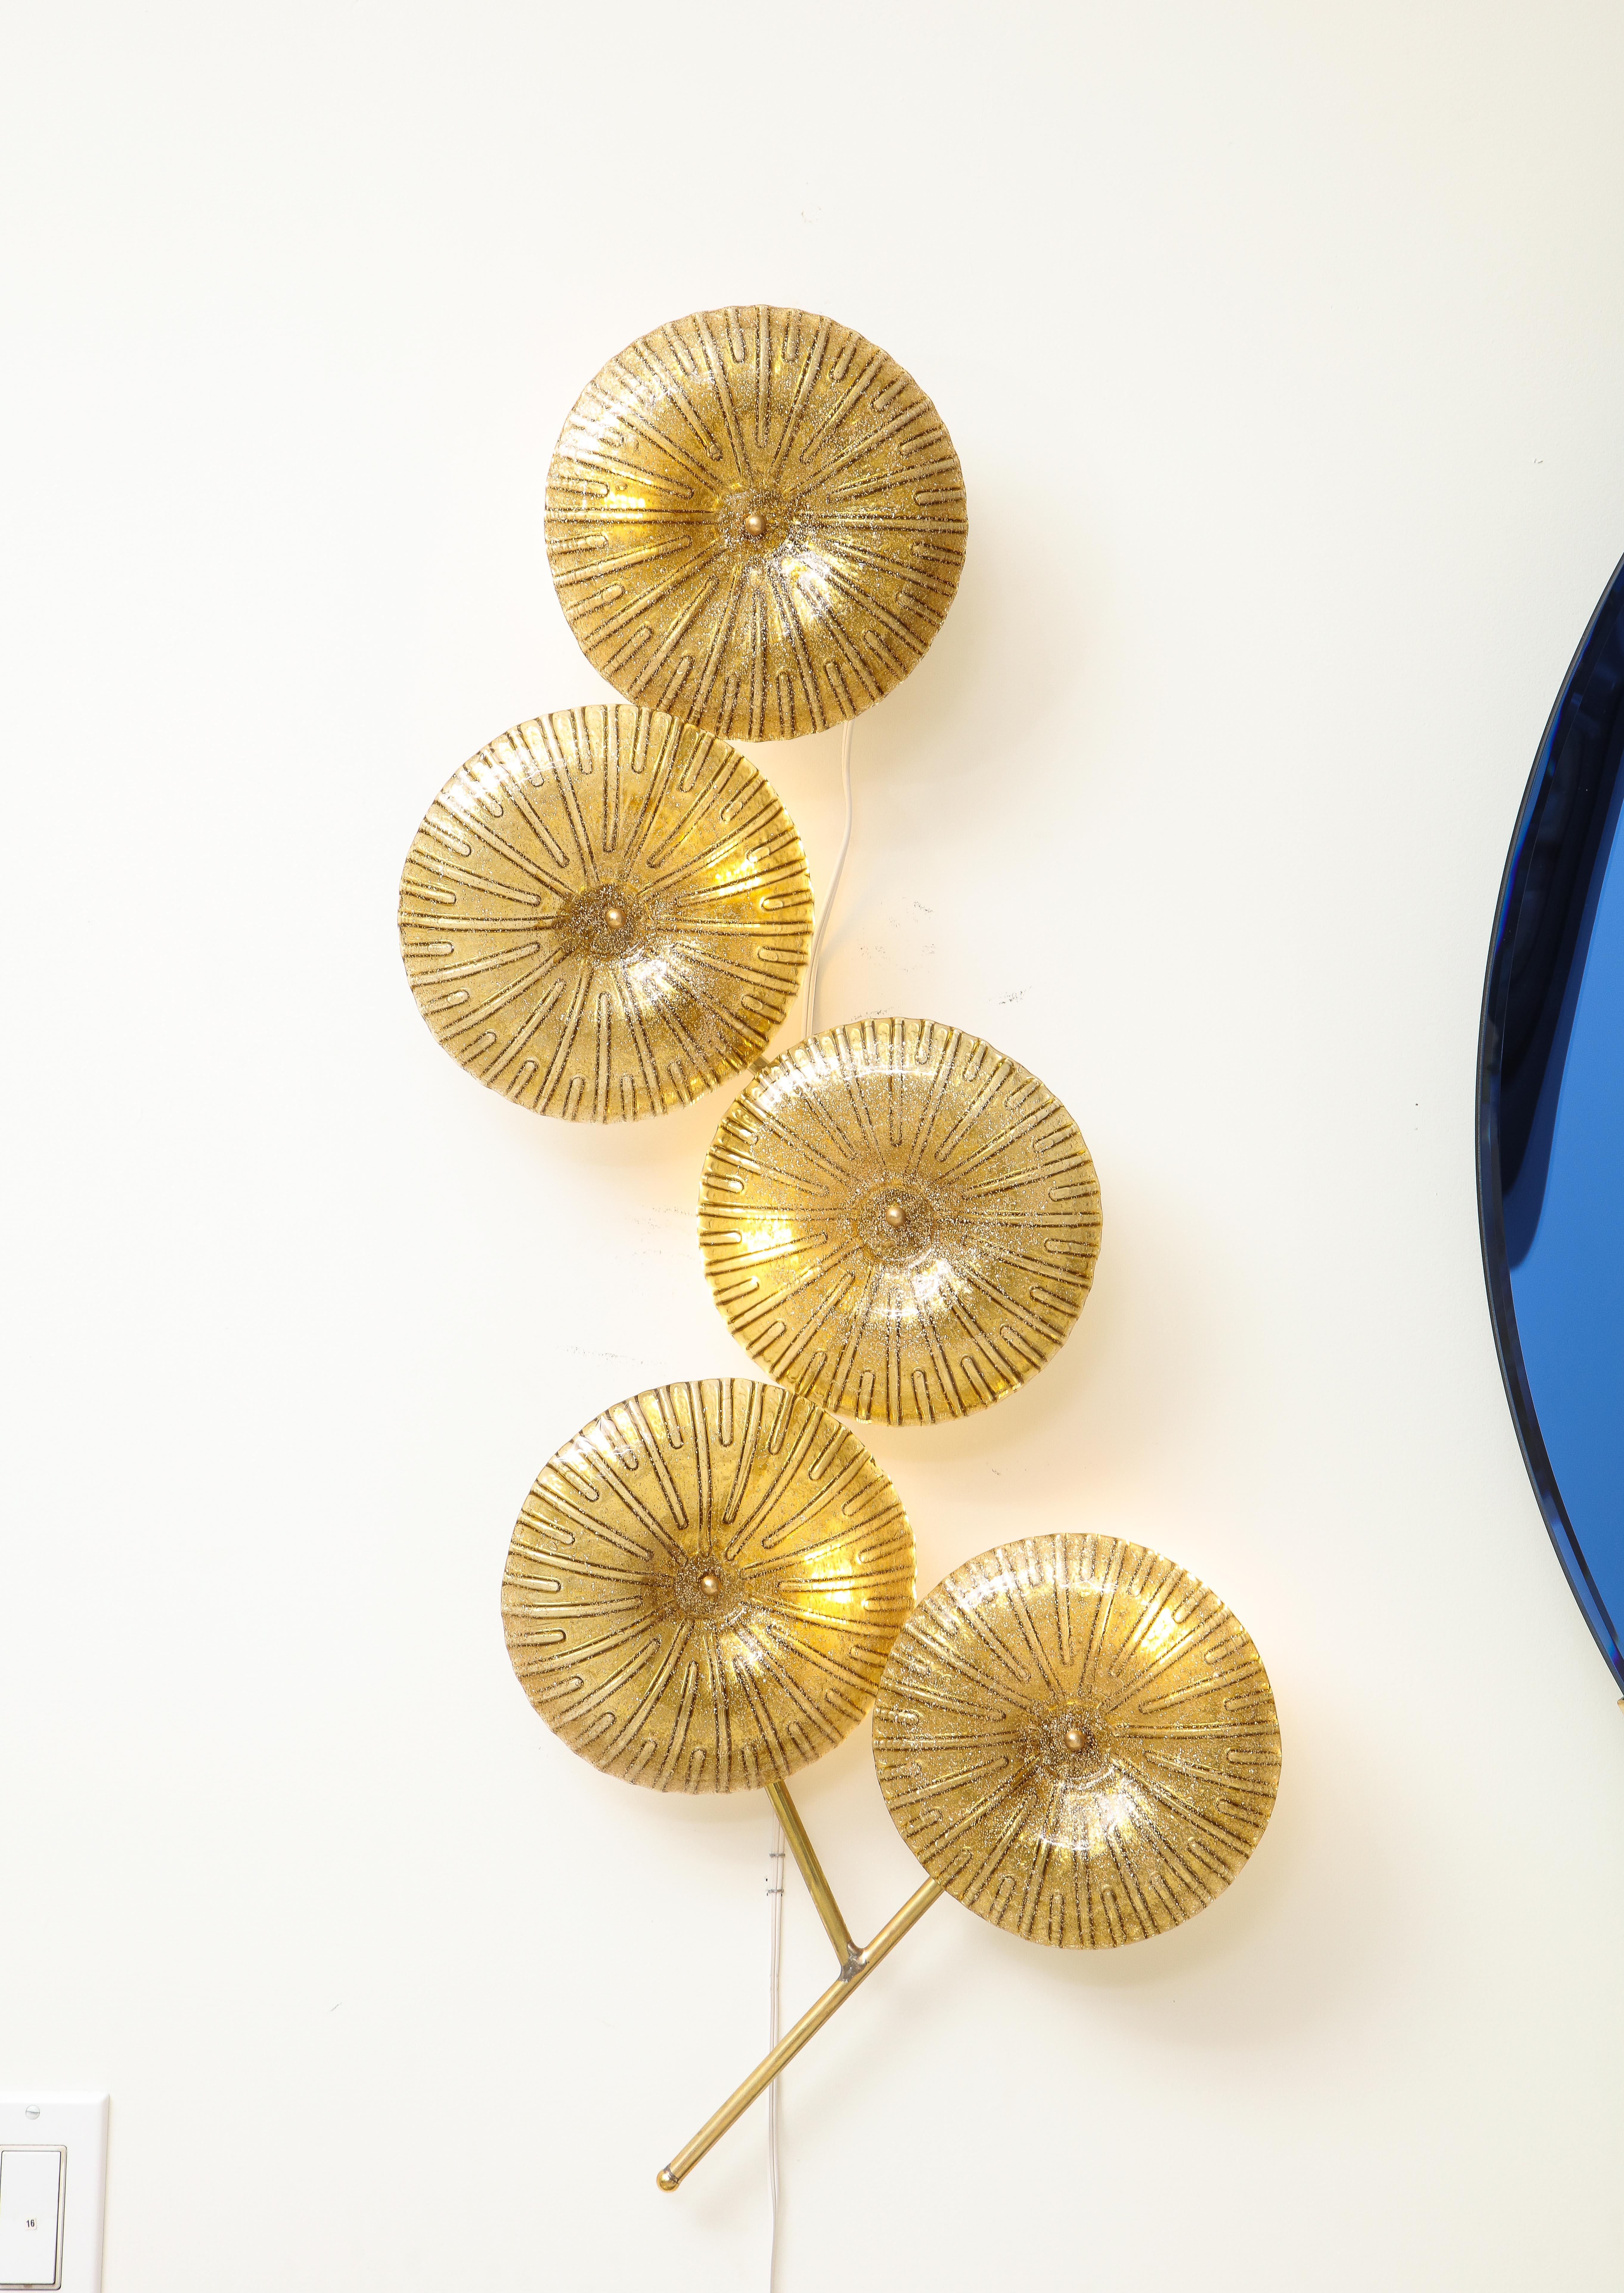 Unique pair of Gold Shimmer Murano glass flowers with brass frame. Hand-casted Murano glass flowers in gold with infused gold flecks are attached with a brass cap to a brass stem. 5 glass 